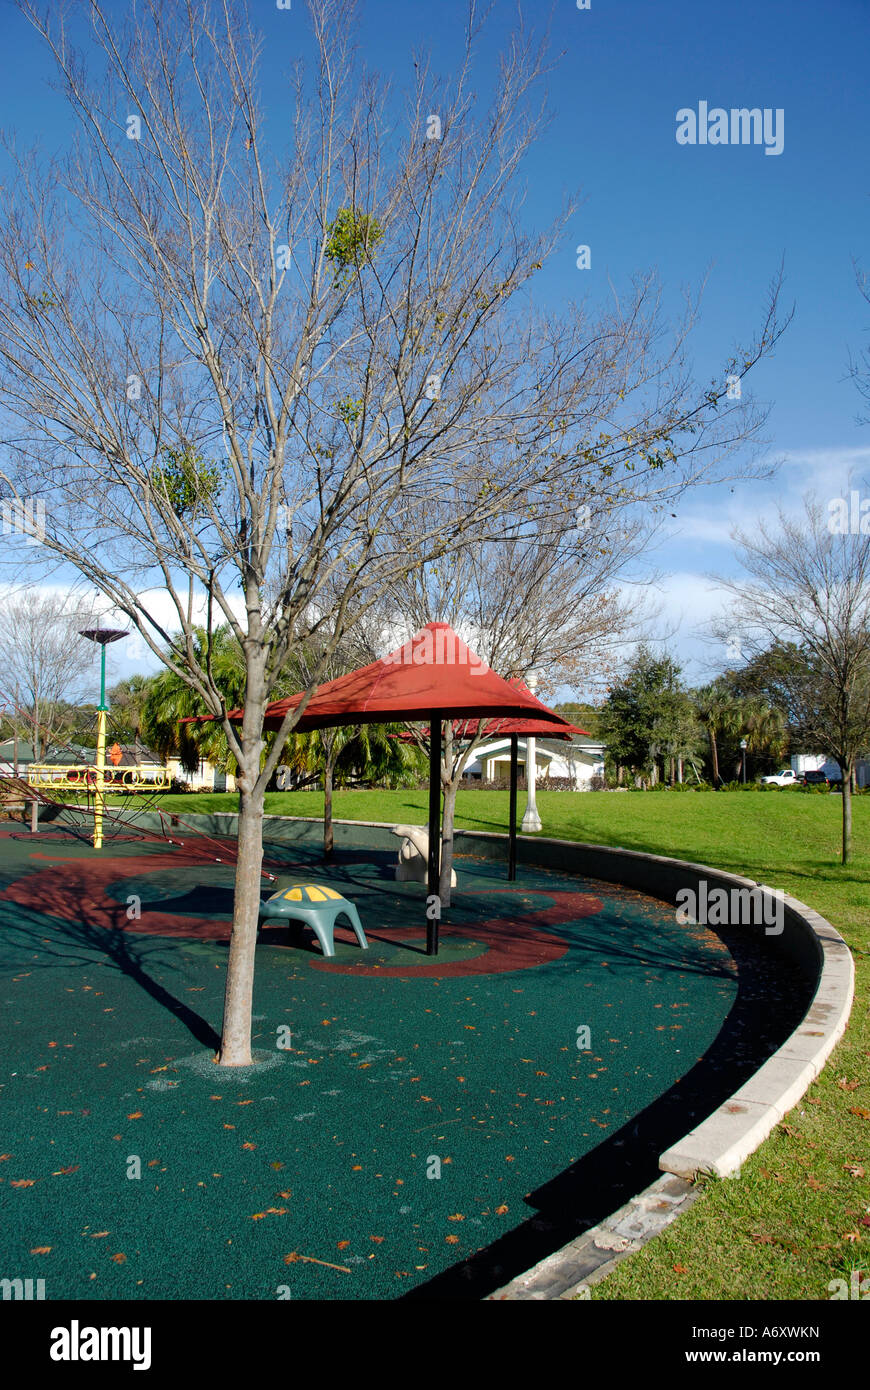 Recycled rubber tires are the base for a children's play area in Barnett Family Park in downtown Lakeland Florida FL USA Stock Photo